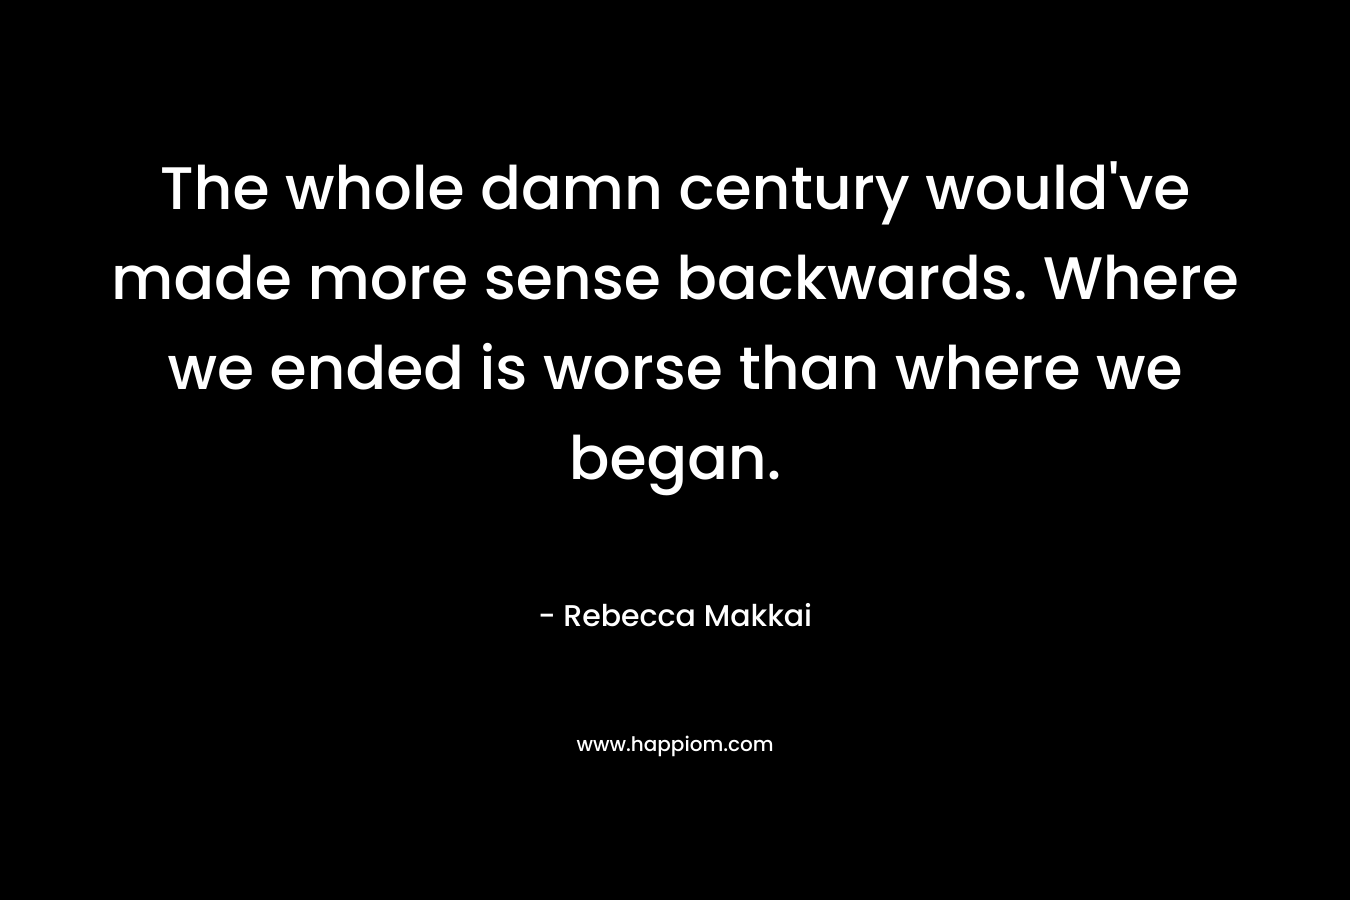 The whole damn century would’ve made more sense backwards. Where we ended is worse than where we began. – Rebecca Makkai